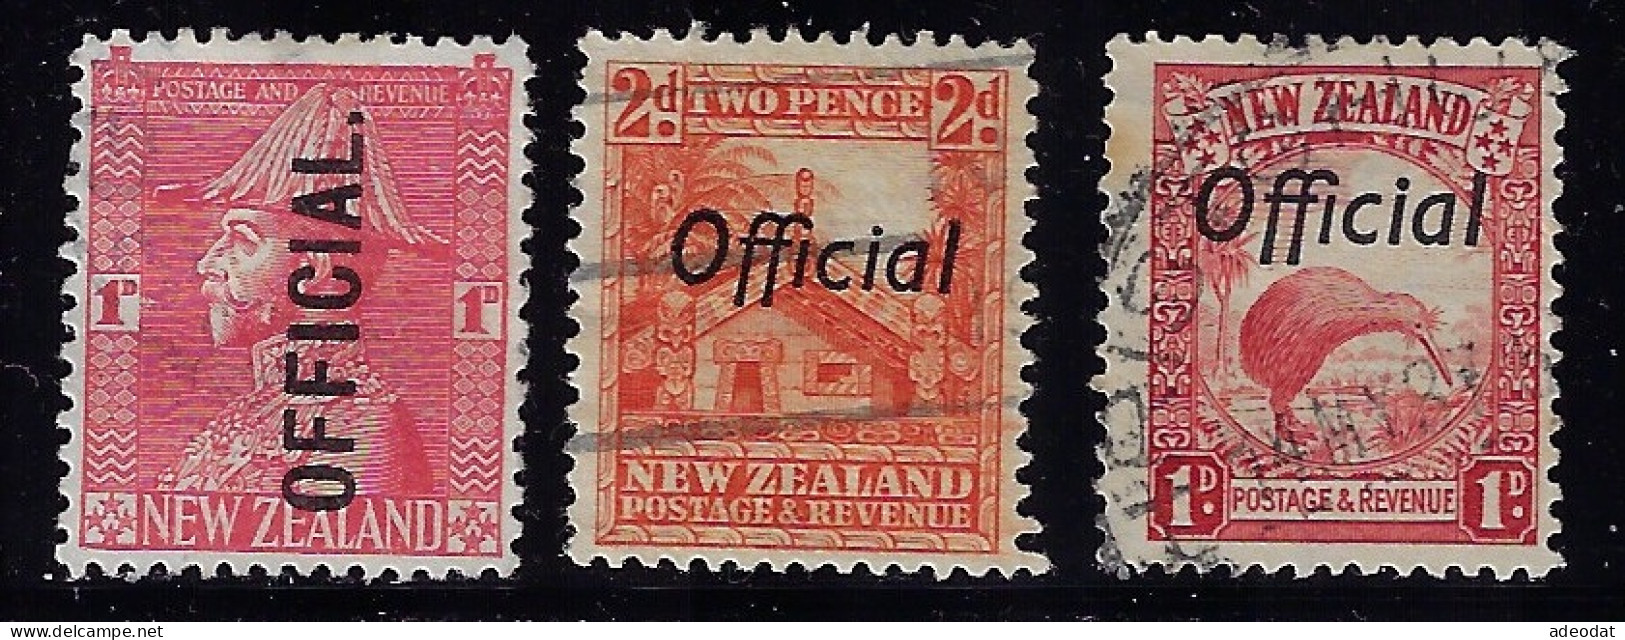 NEW ZEALAND 1936 0FFICIAL STAMPS  SCOTT #O55,O58,O64 USED - Oficiales